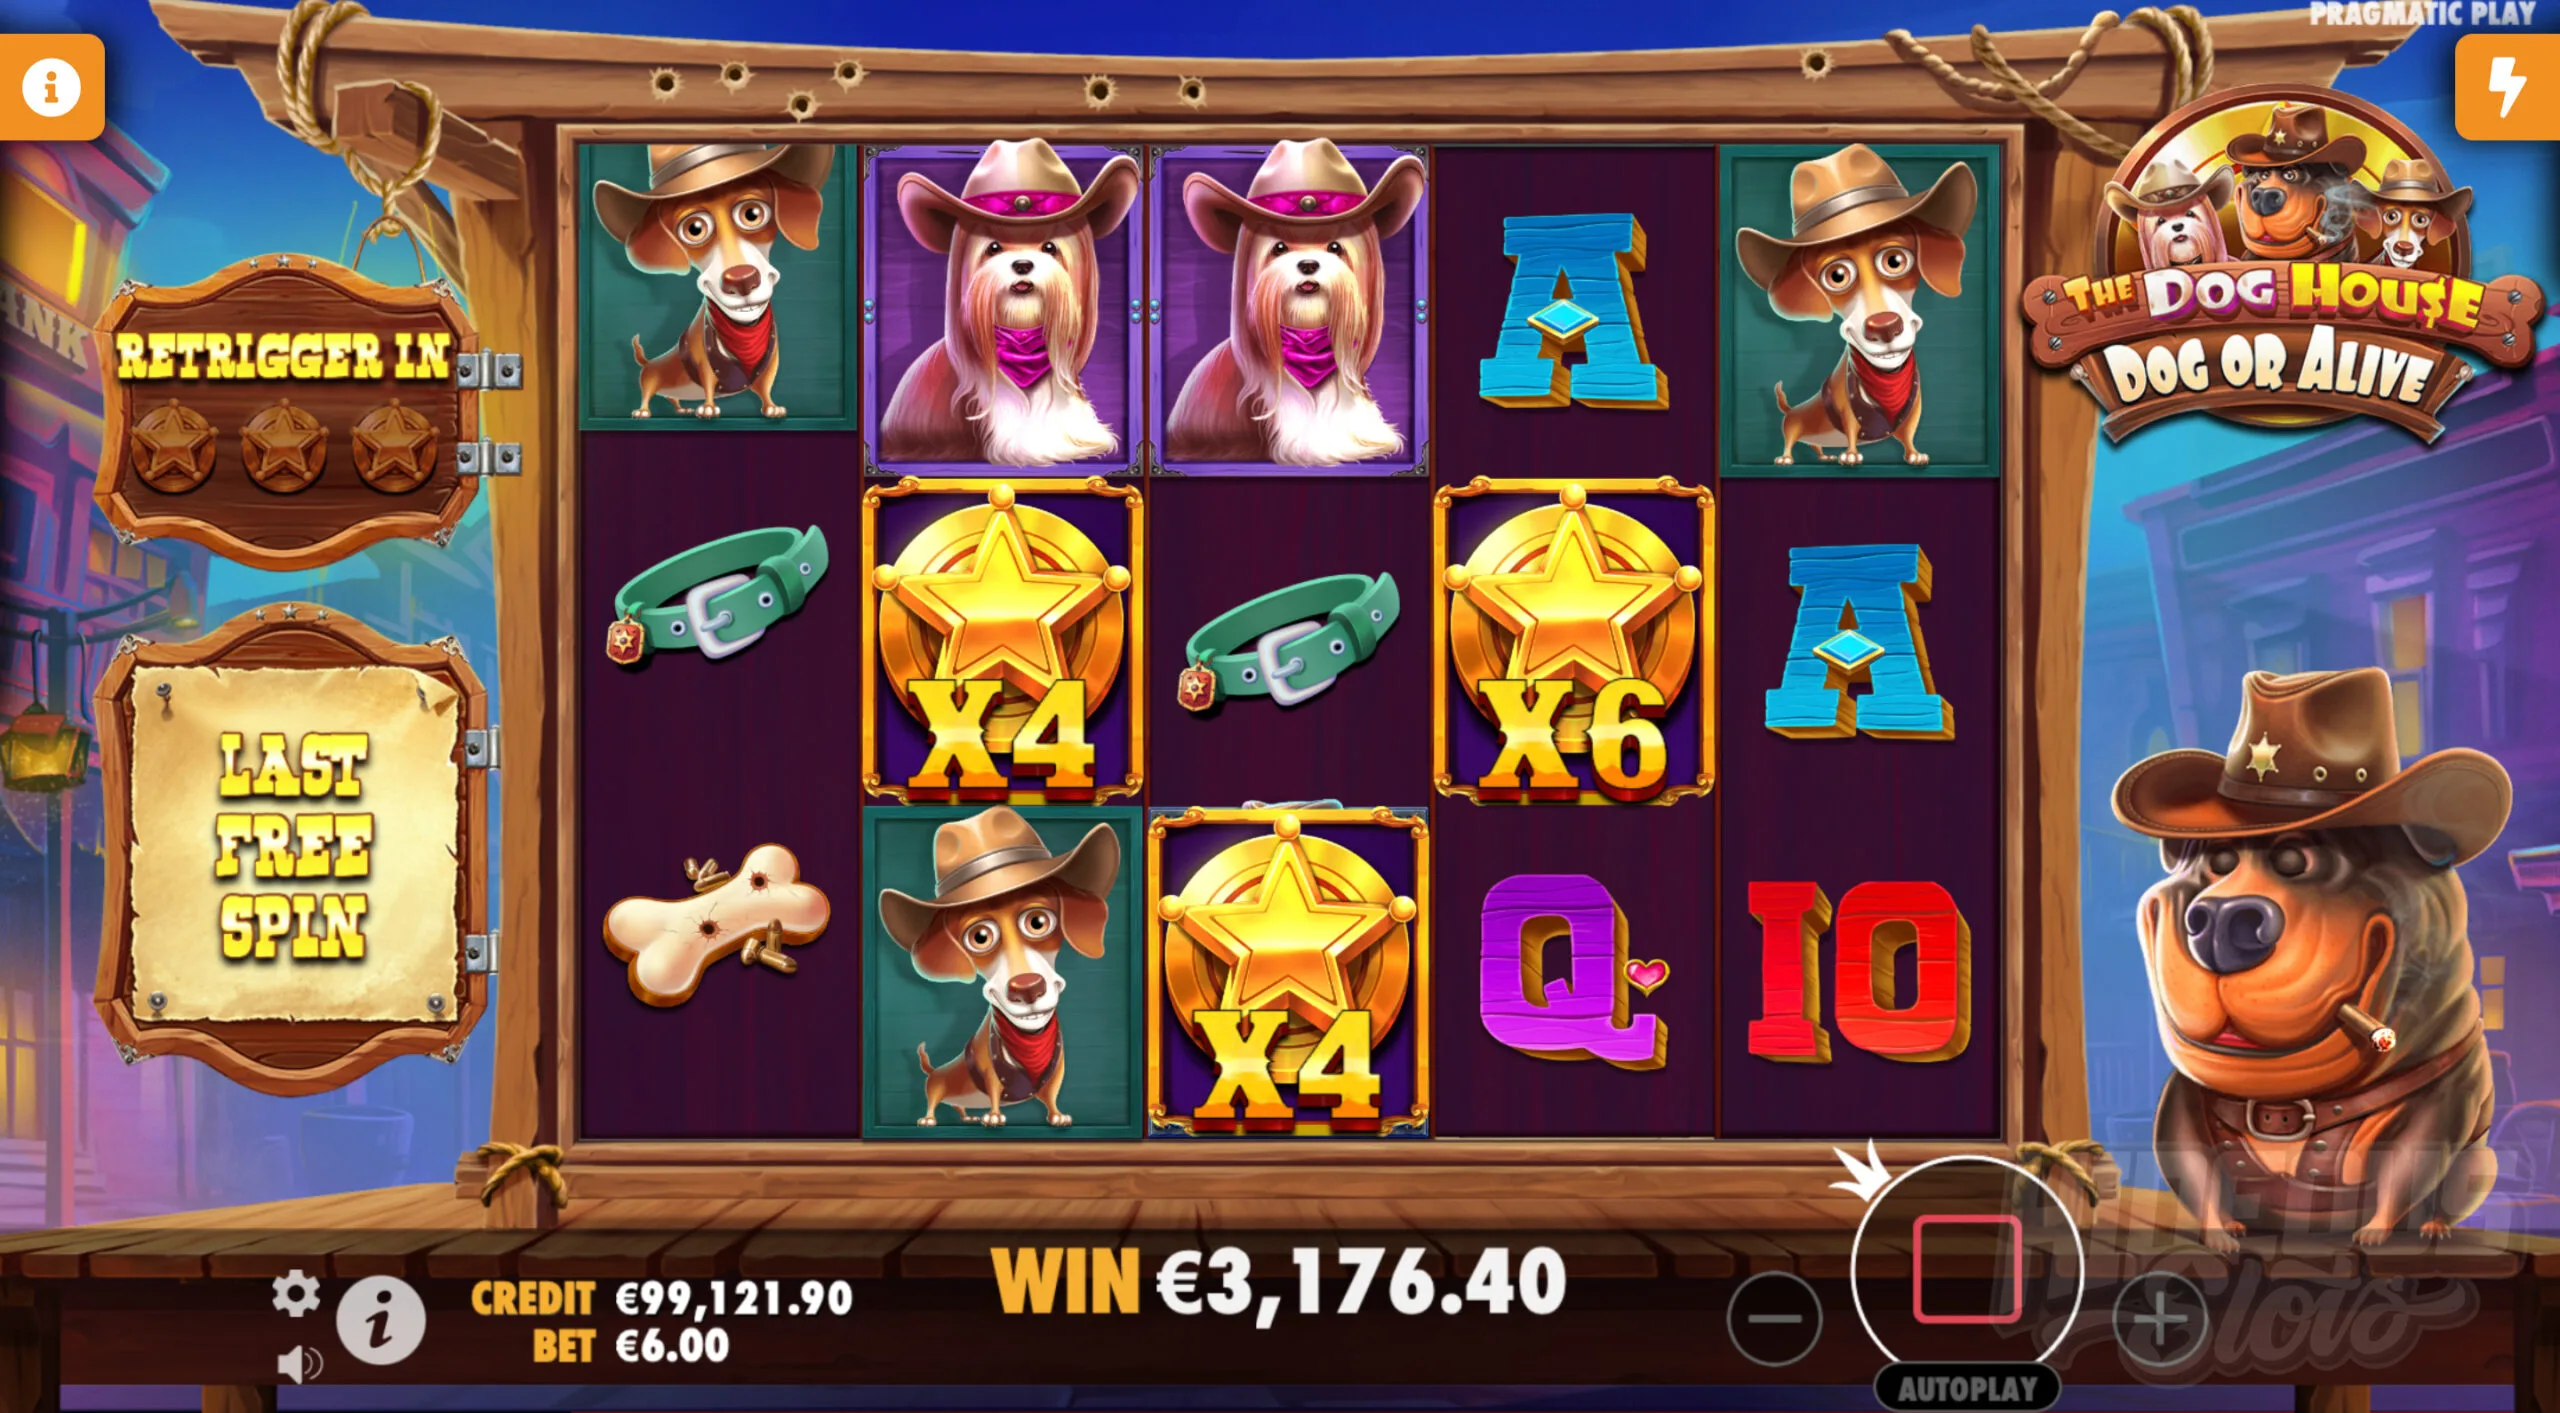 The Dog House - Dog or Alive Free Spins